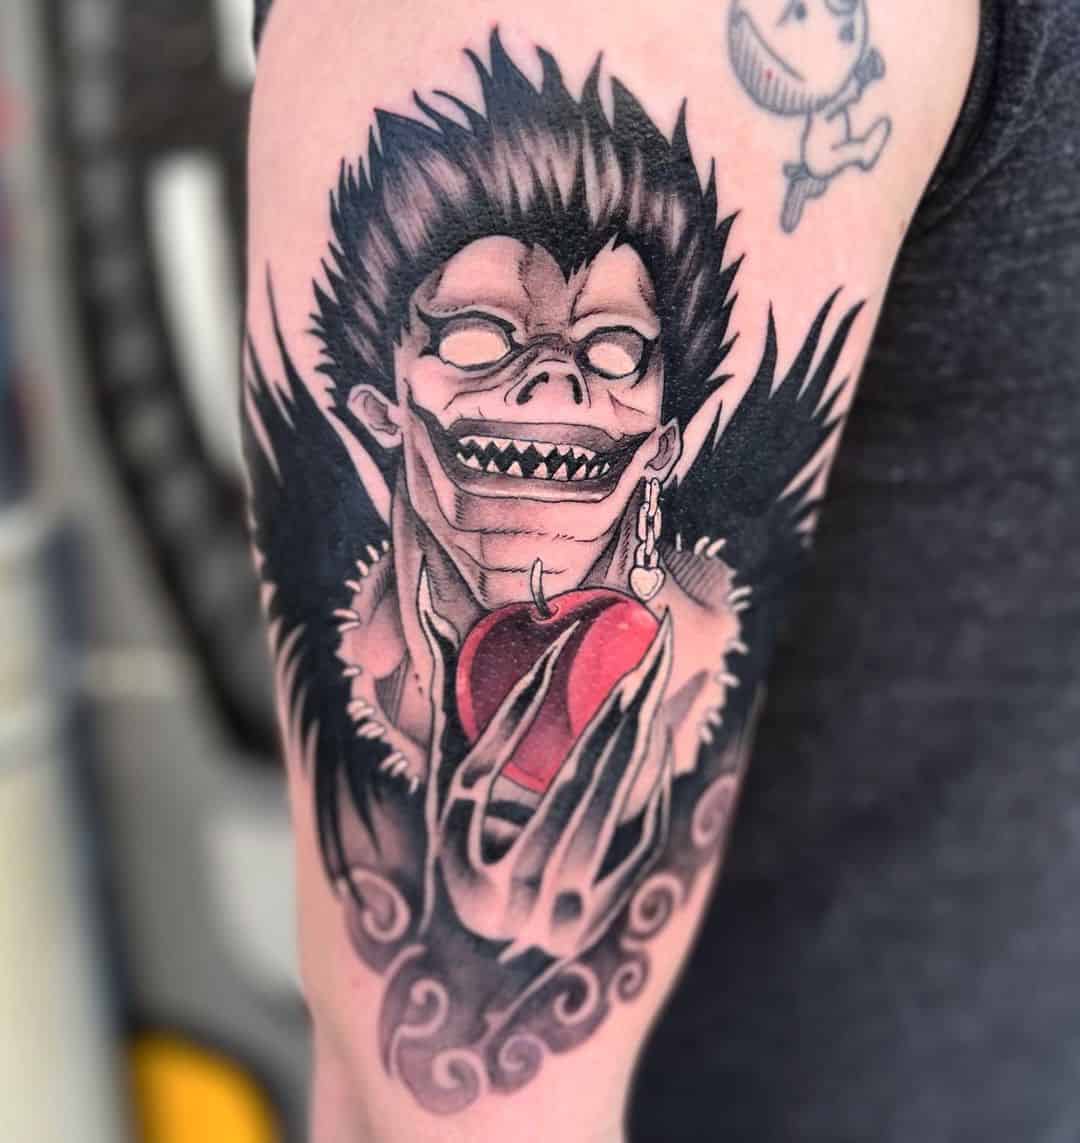 Addicted To Ink Tattoos  White Plains NY  Any Death Note fans Awesome Light  Yagami piece done by tattoosbymikev on our very own maddxrose Stop by  during regular business hours to